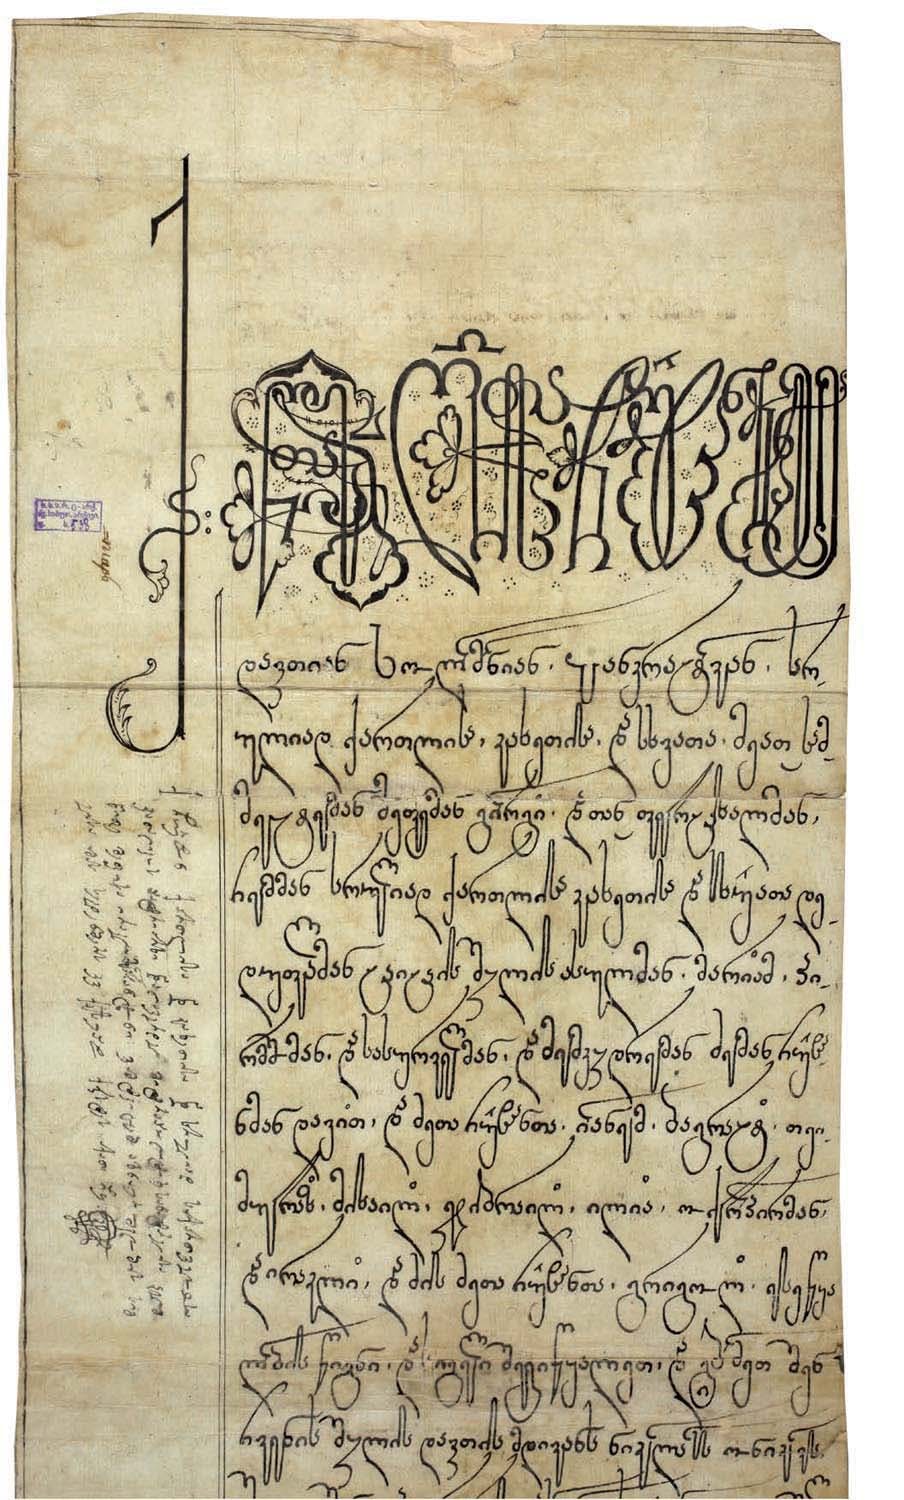 deed of ennoblement granted by King Giorgi XII